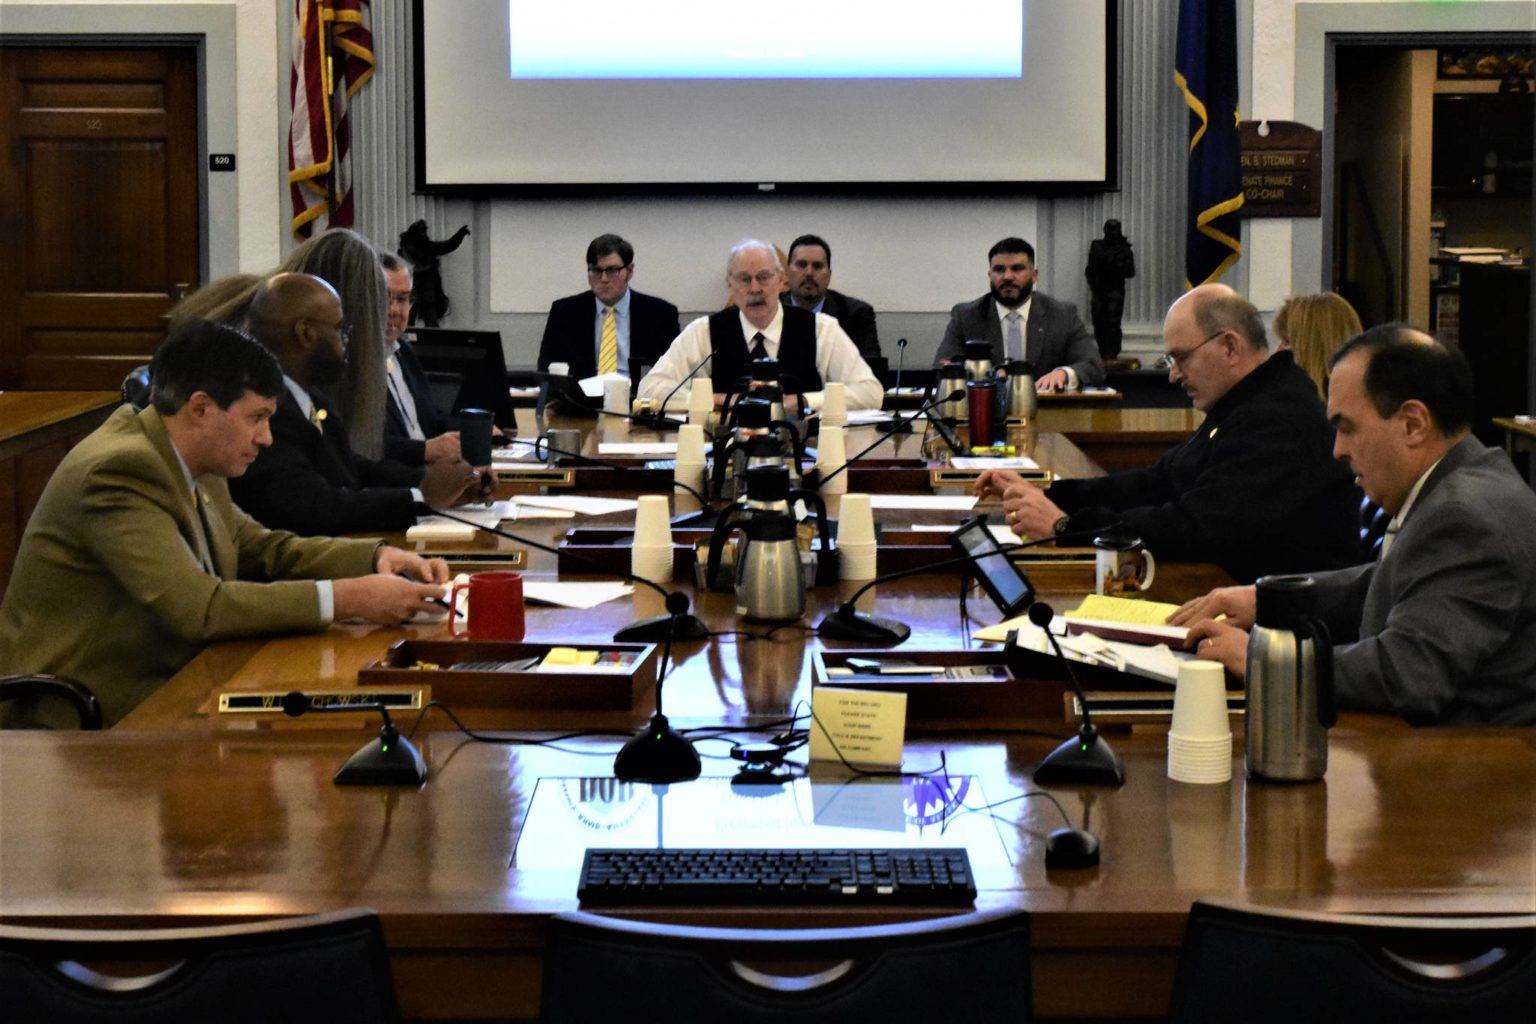 Senate Finance Committee Chairman Sen. Bert Stedman, R-Sitka, sits at the head of the table at a committee meeting on Thursday, Jan. 23, 2020. (Peter Segall | Juneau Empire)